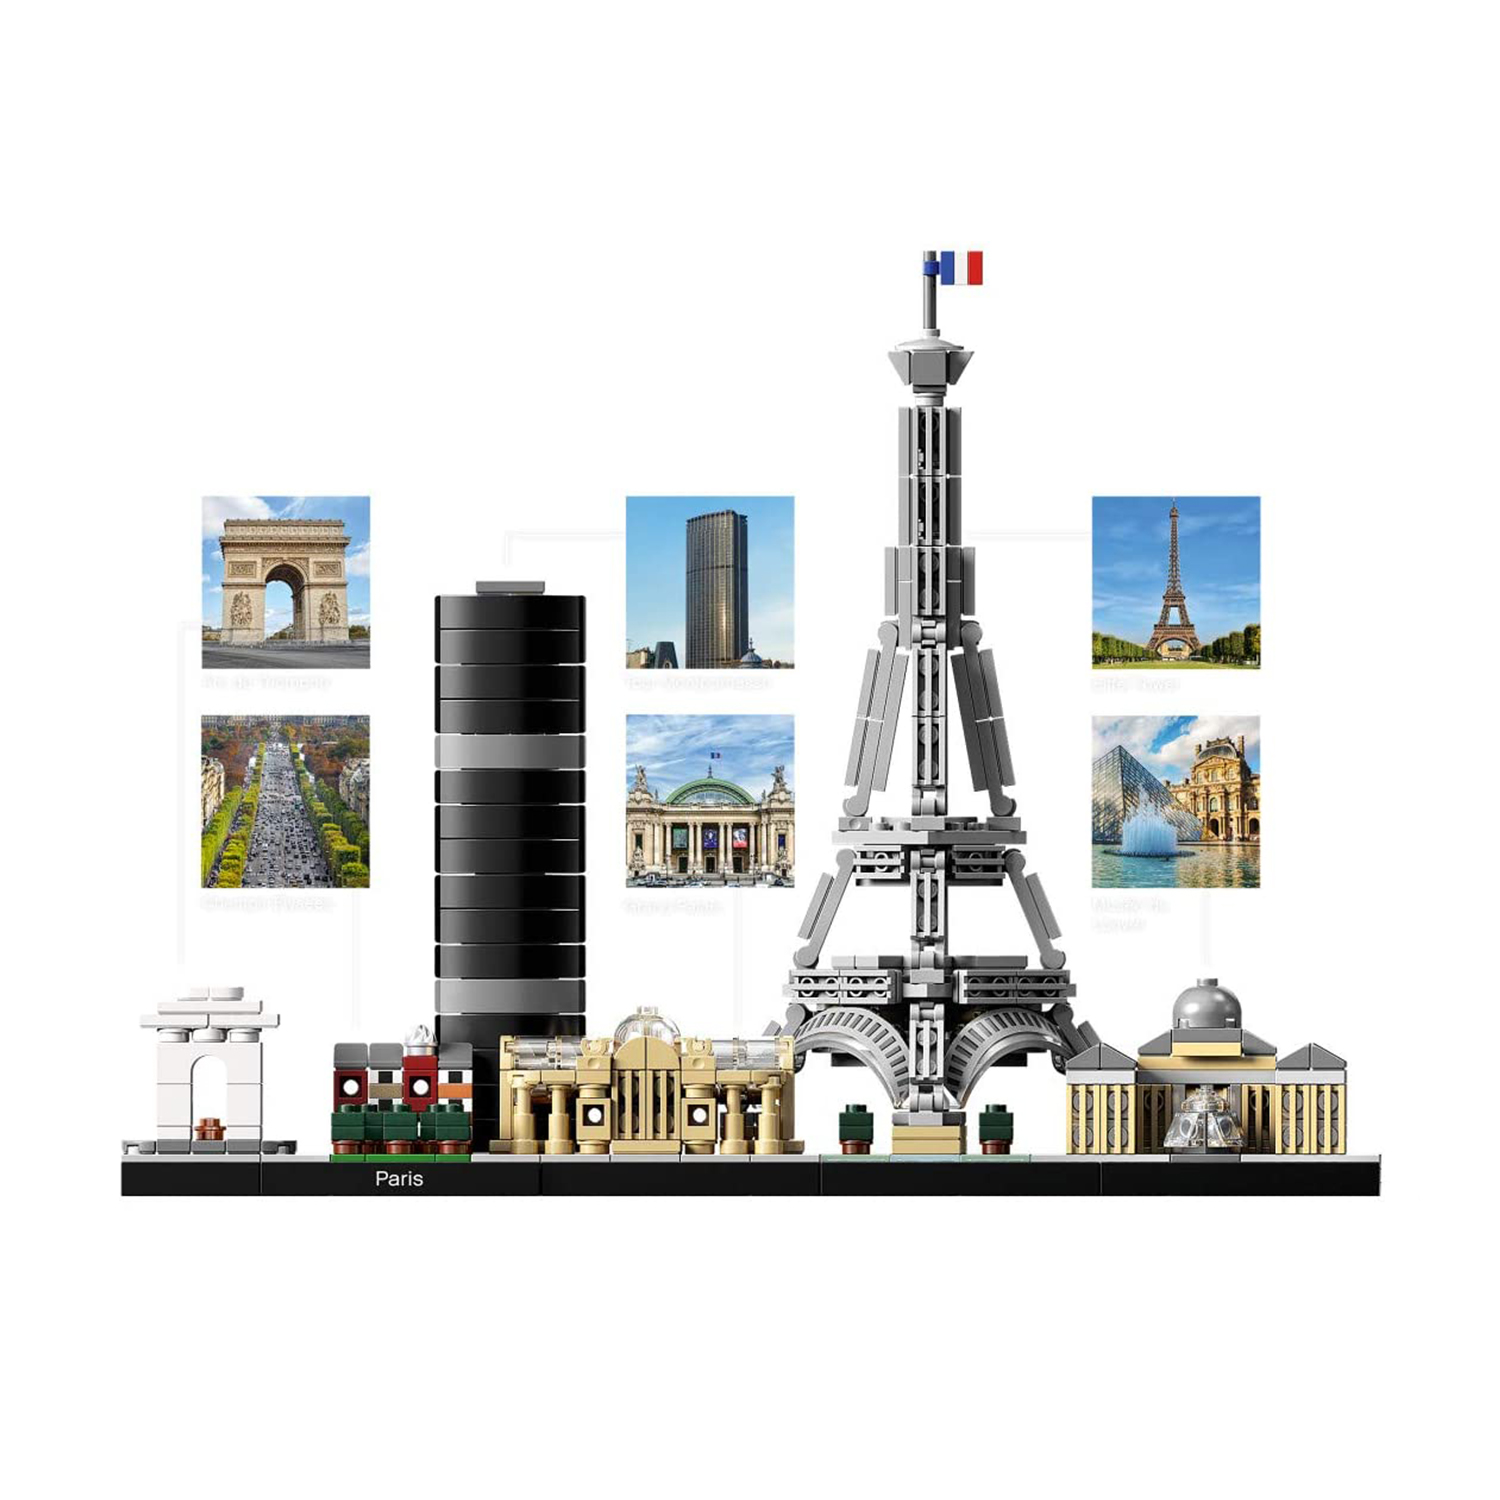 LEGO Architecture Paris Skyline, Collectible Model Building Kit with Eiffel Tower and The Louvre, Skyline Collection, Office Home Décor, Unique Gift to Unleash any Adult's Creativity, 21044 - image 4 of 6